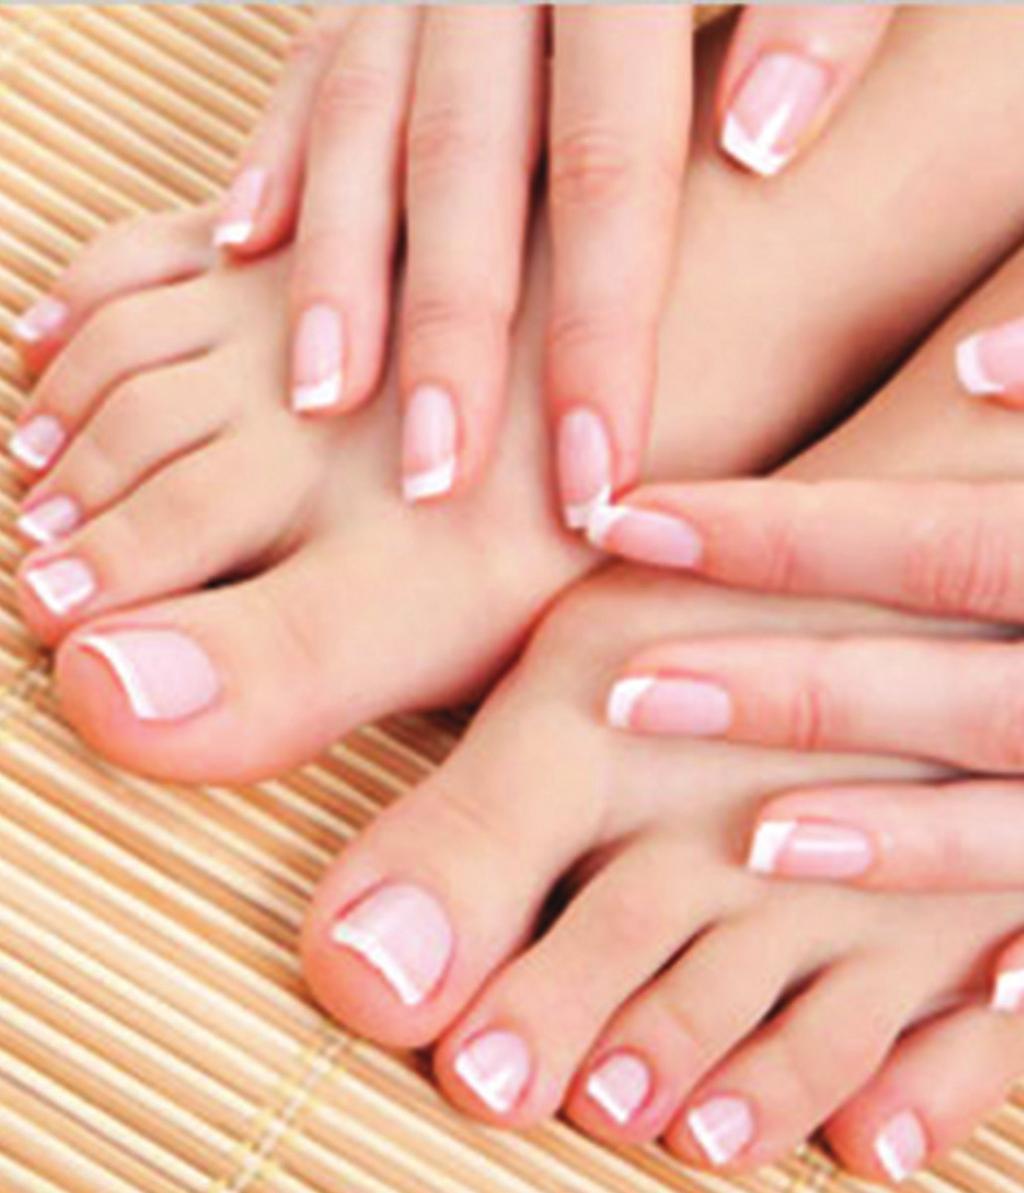 The manicure will include exfoliation and cuticle care. The nails wil be beautifully shaped and treated with polish application. LUXURY MANICURE 16.